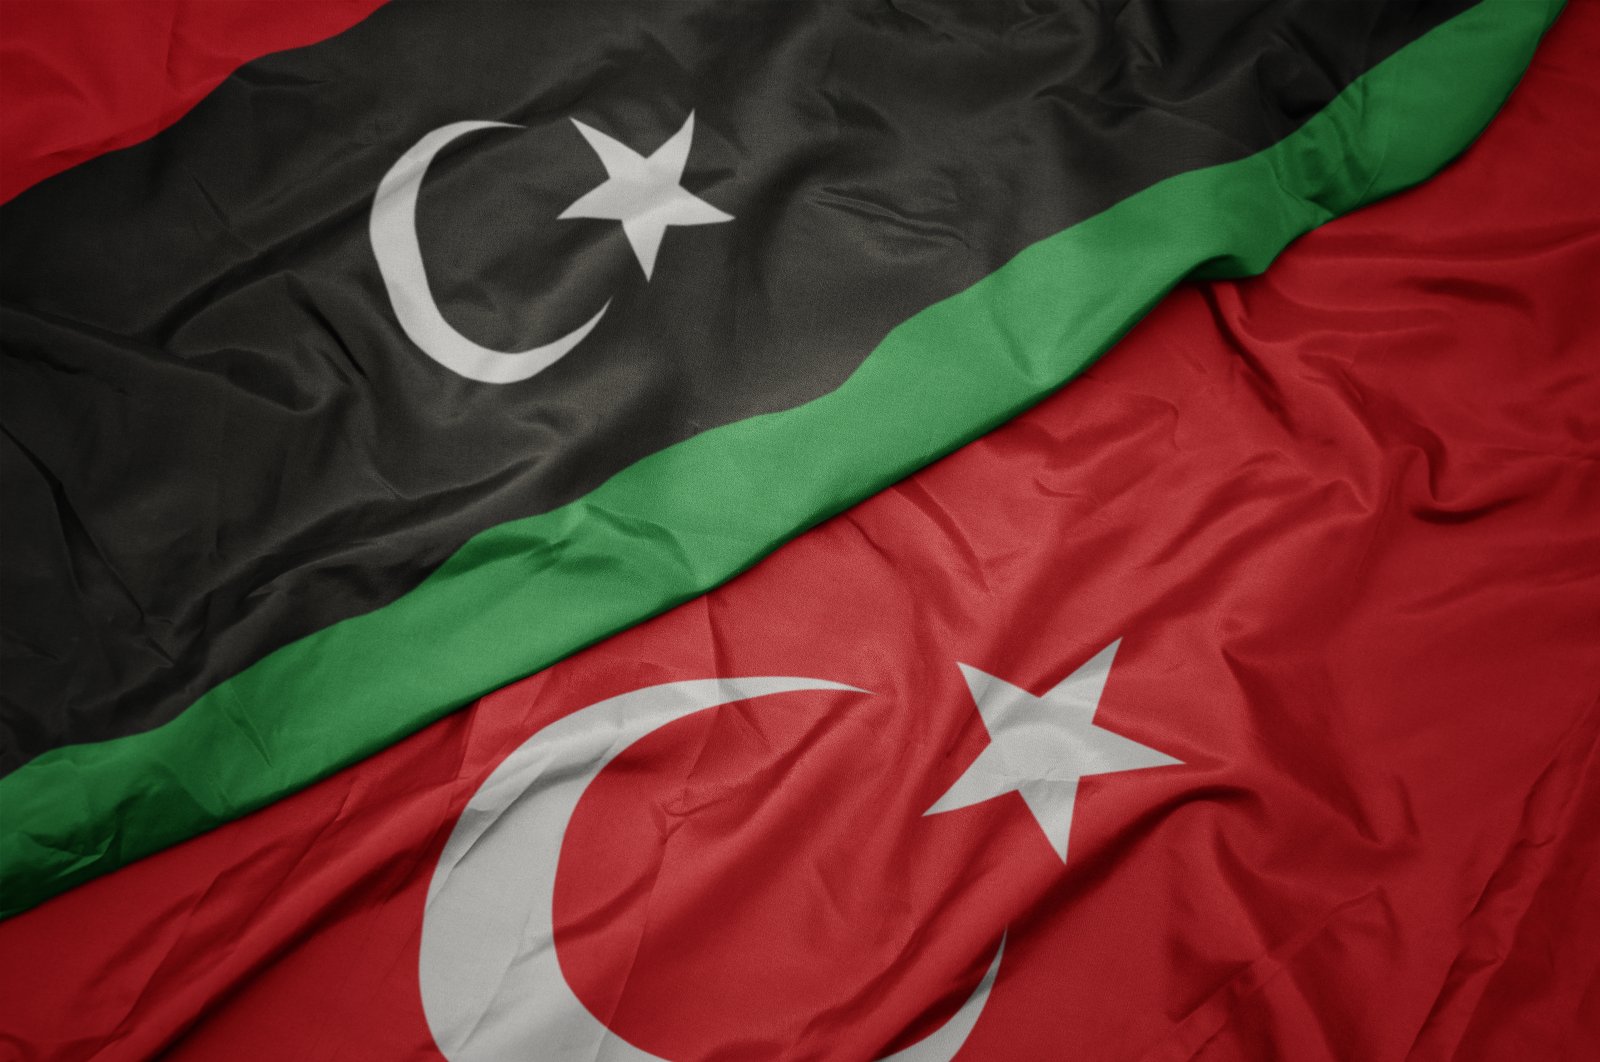 The Turkish and Libyan flags are seen together. (Illustration by Shutterstock)